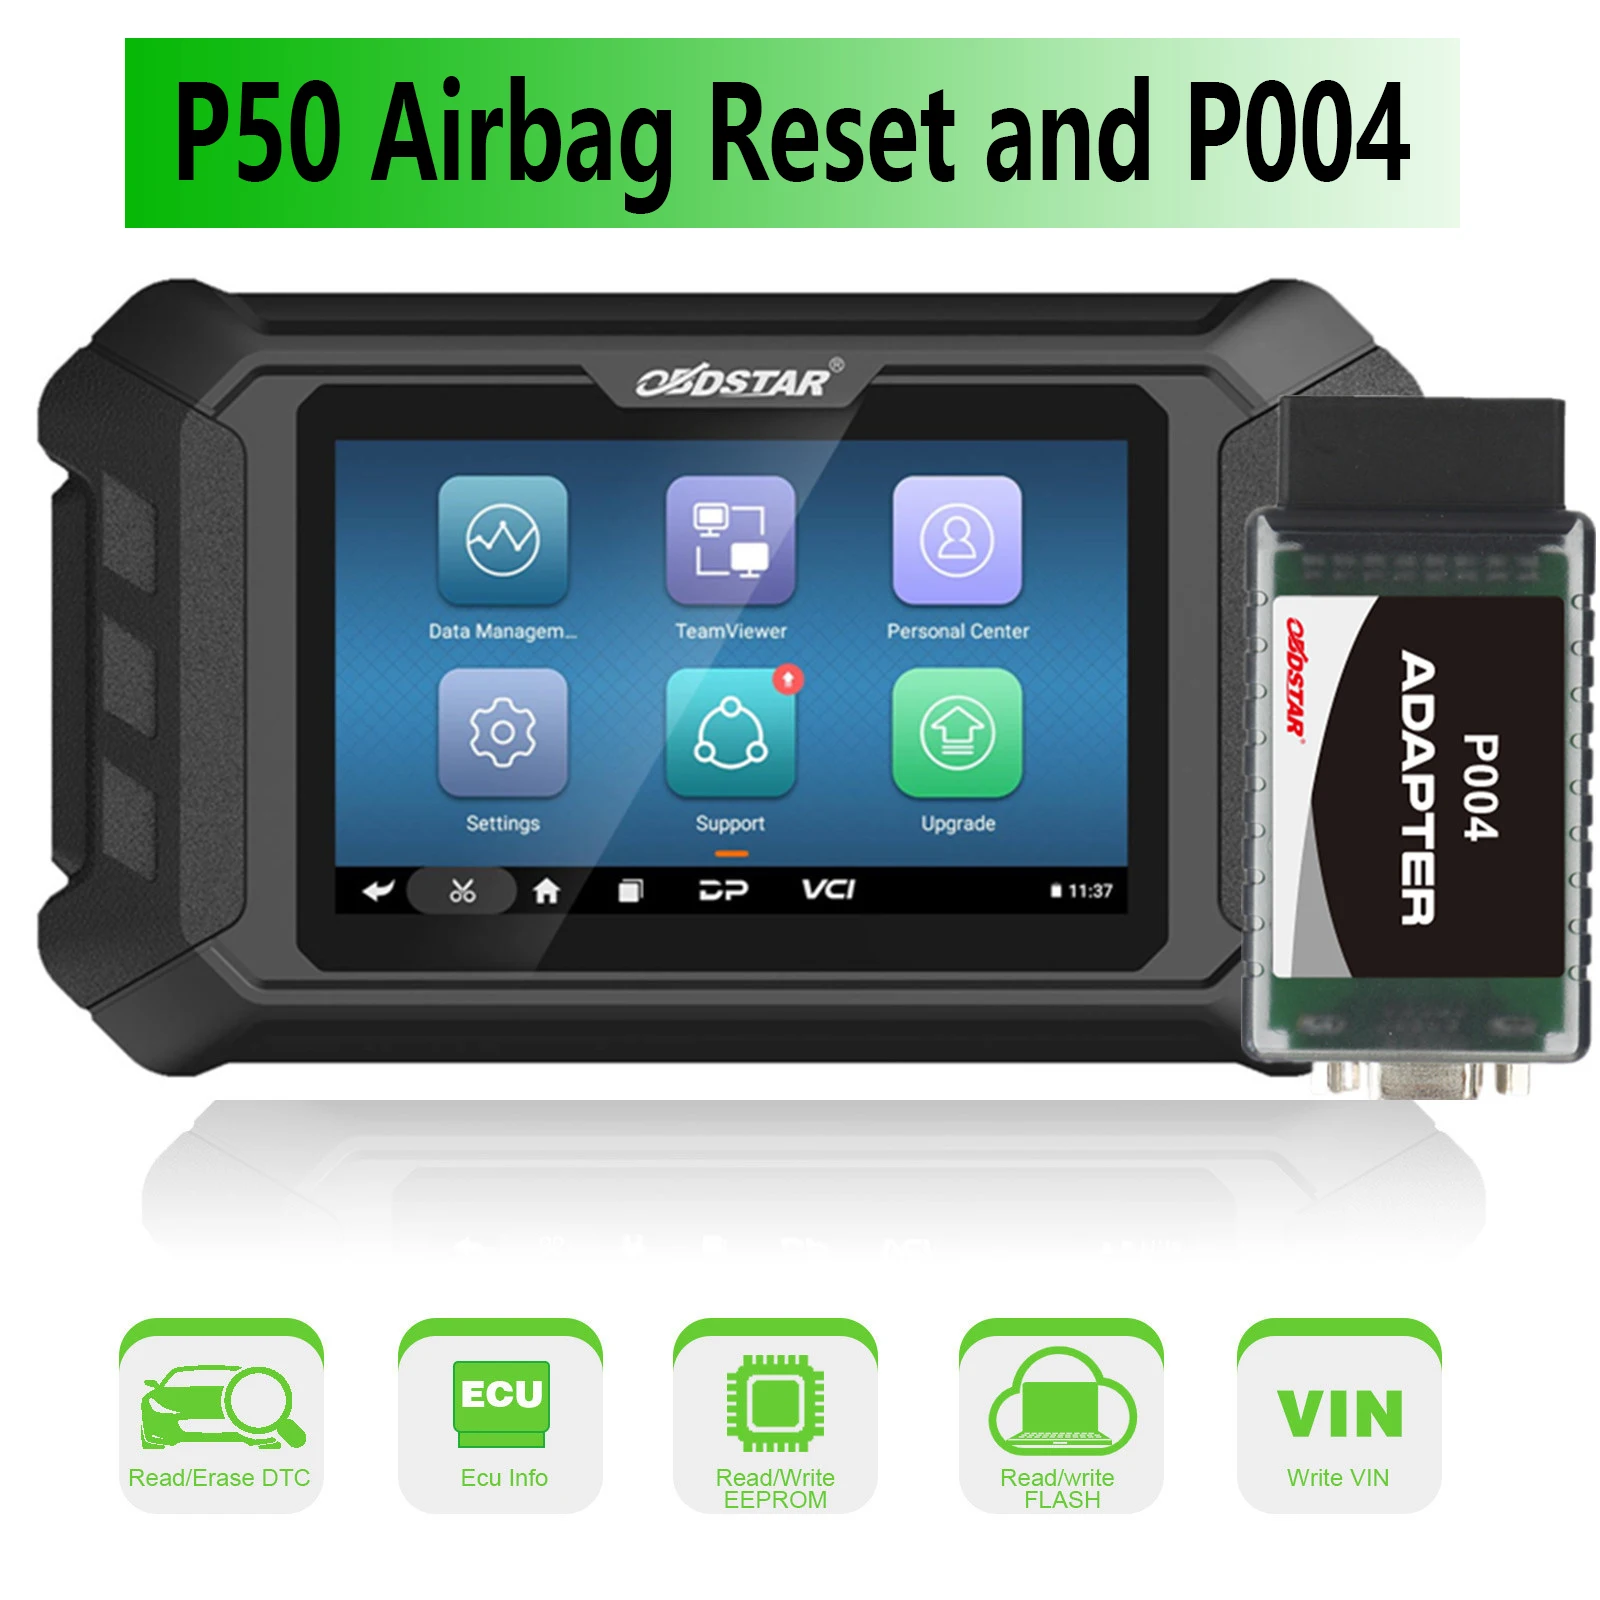 

OBDSTAR P50 Airbag Reset + PINCODE Intelligent Airbag Reset Scan Equipment Covers 38 Brands and Over 3000 ECU Part No.with P004